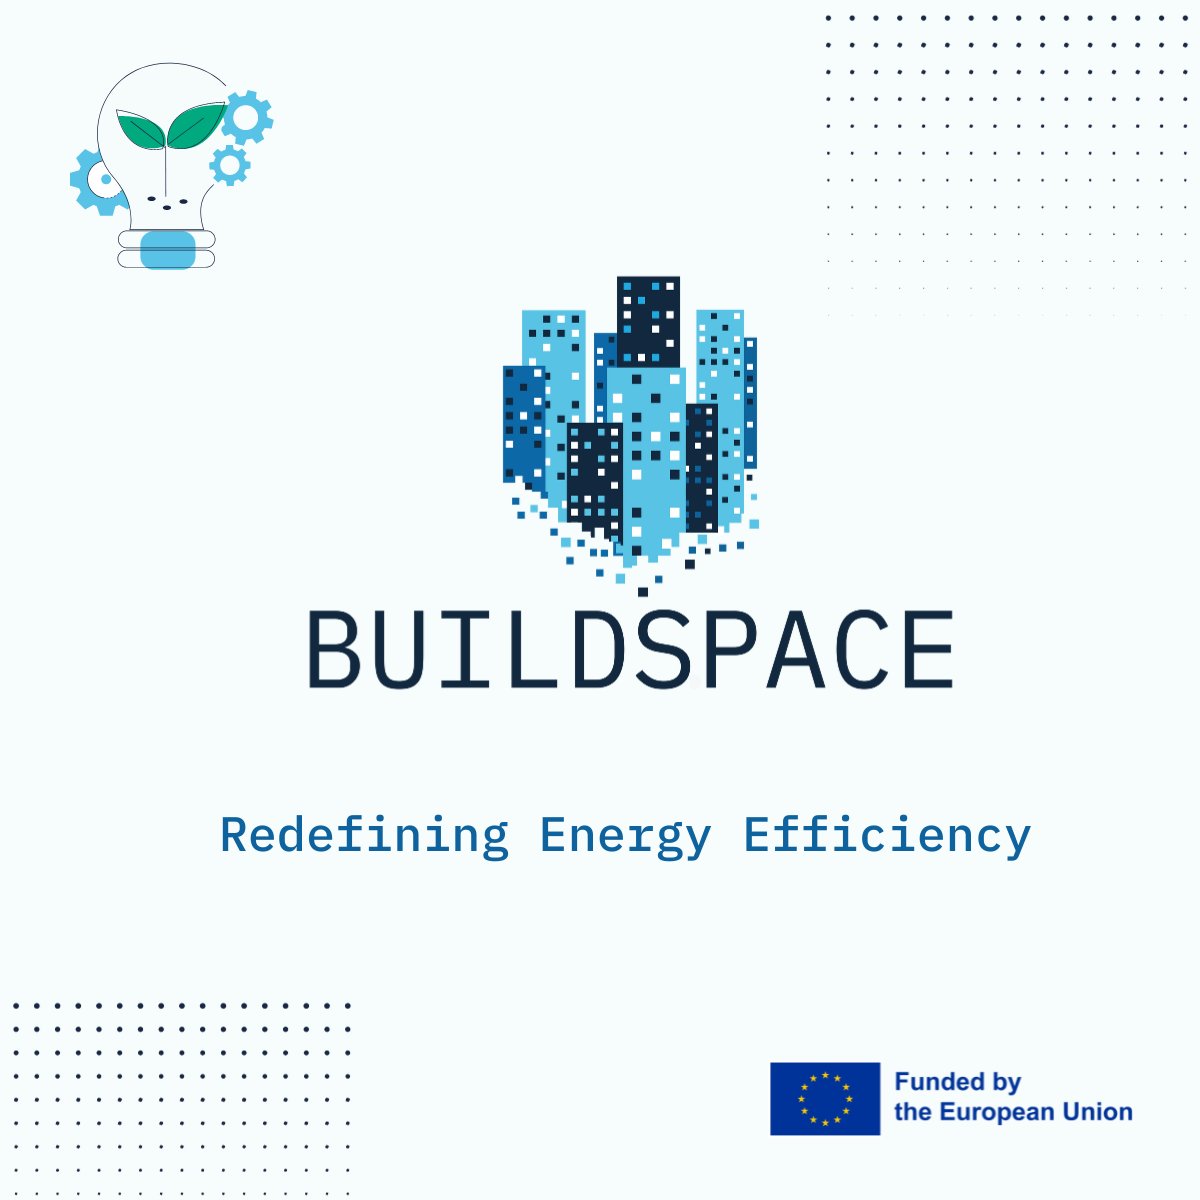 🚀 With the start of the New Year, we continue cheerfully on our way to success. 💚🏙️ In 2023, the #BUILDSPACEproject reinforced its commitment to advancing energy-efficient buildings and climate-resilient cities. Stay tuned as it continues to shape a more sustainable future.